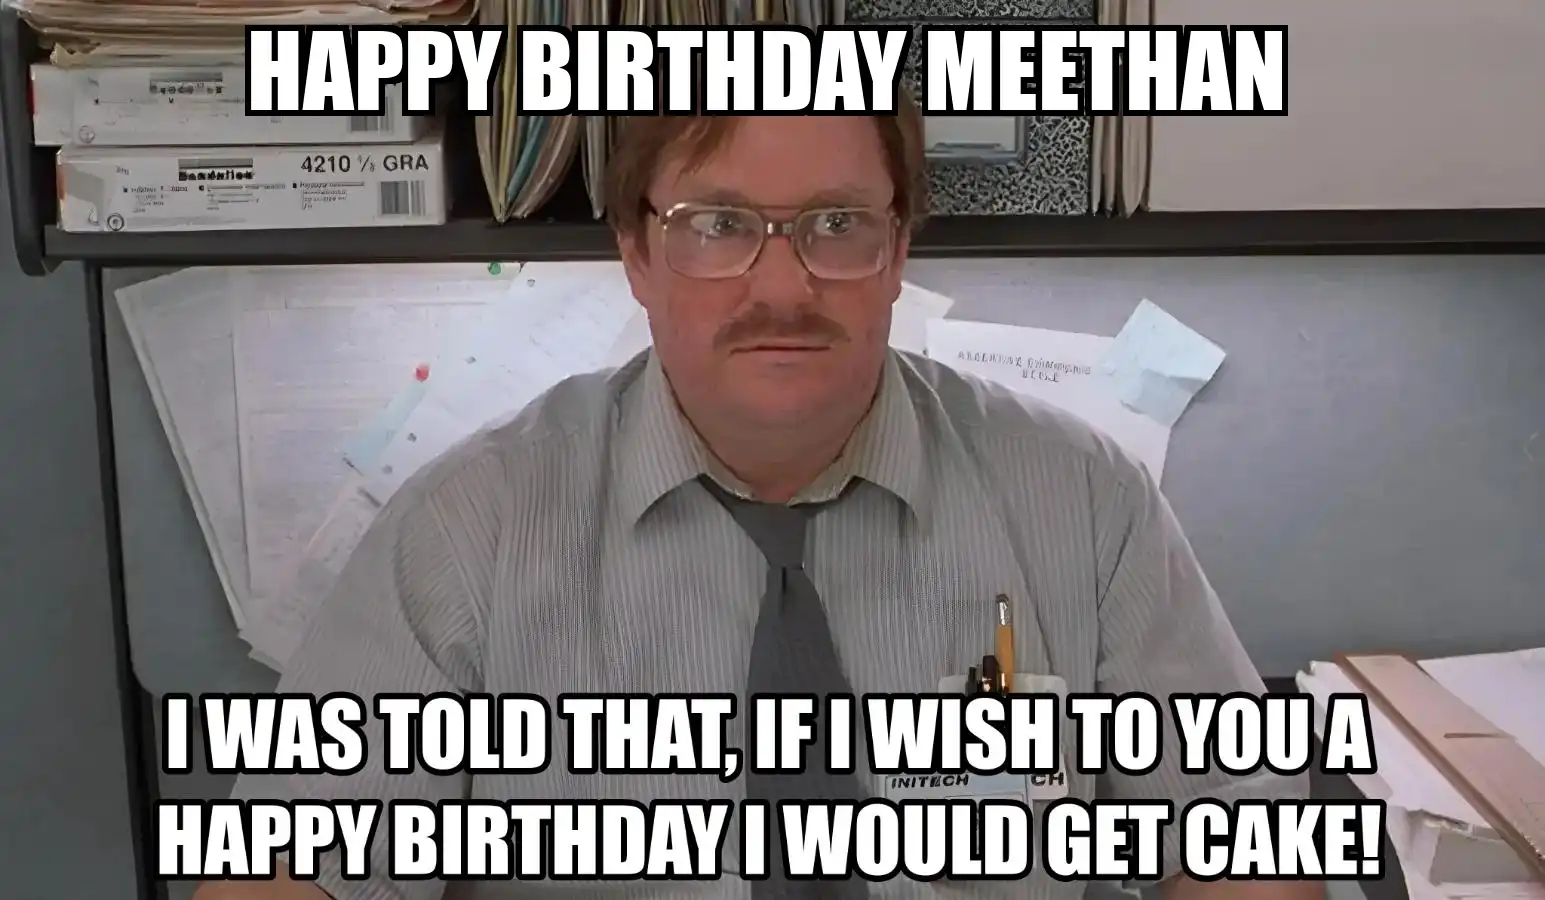 Happy Birthday Meethan I Would Get A Cake Meme